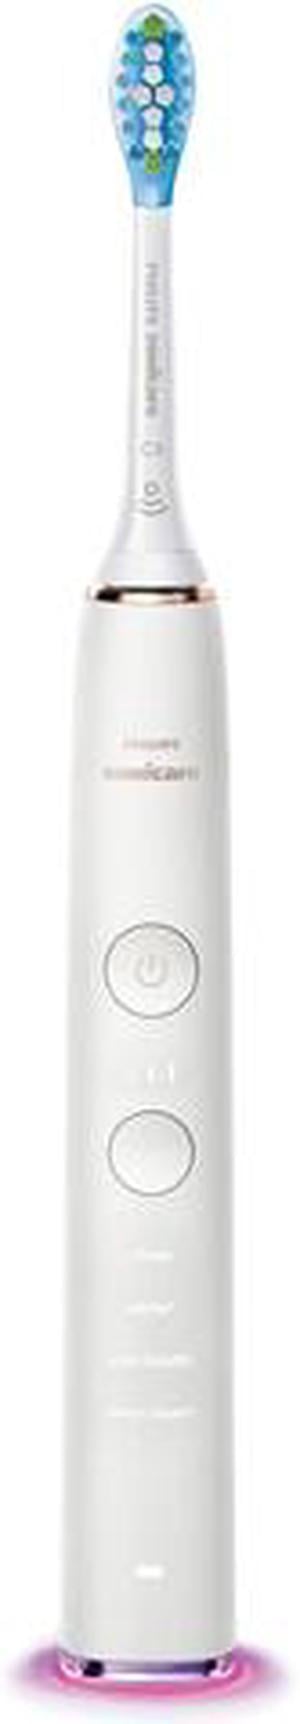 Philips Sonicare DiamondClean Smart 9300 Rechargeable Electric Power Toothbrush, Rose Gold (HX9903/61)